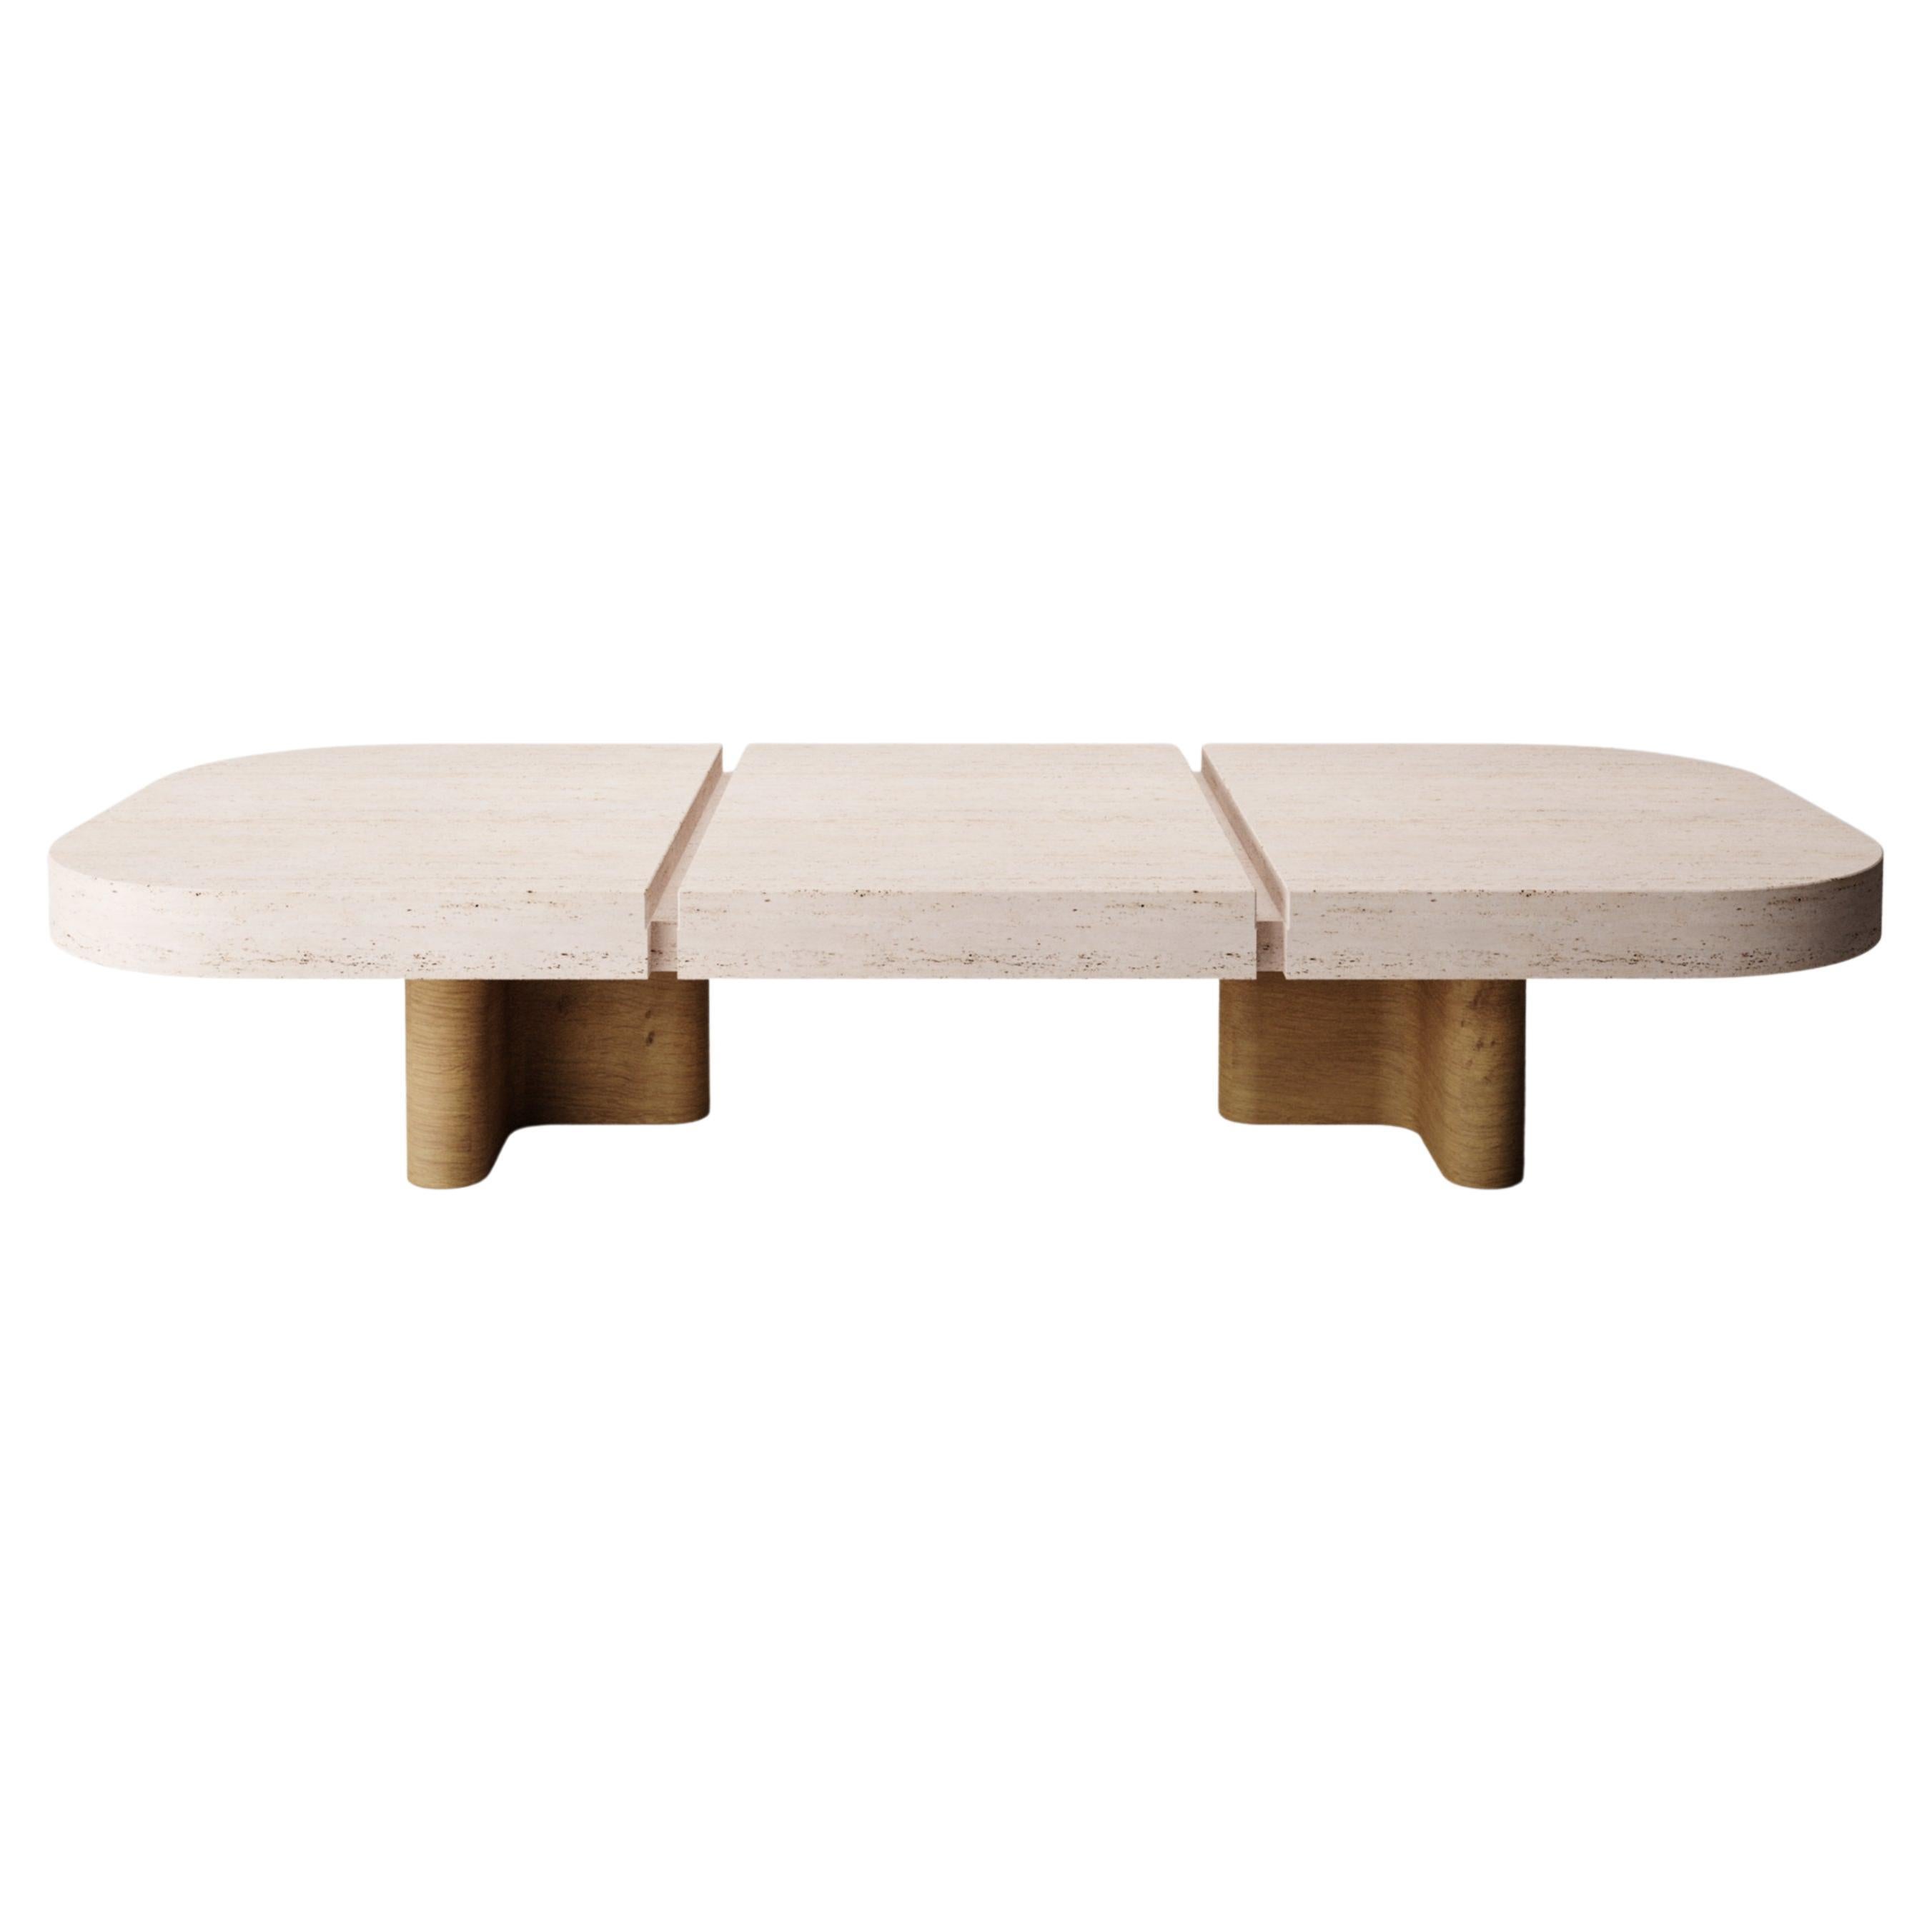 Collector -Designed by Studio Rig Meco Center Table Natural Oak und Travertino im Angebot